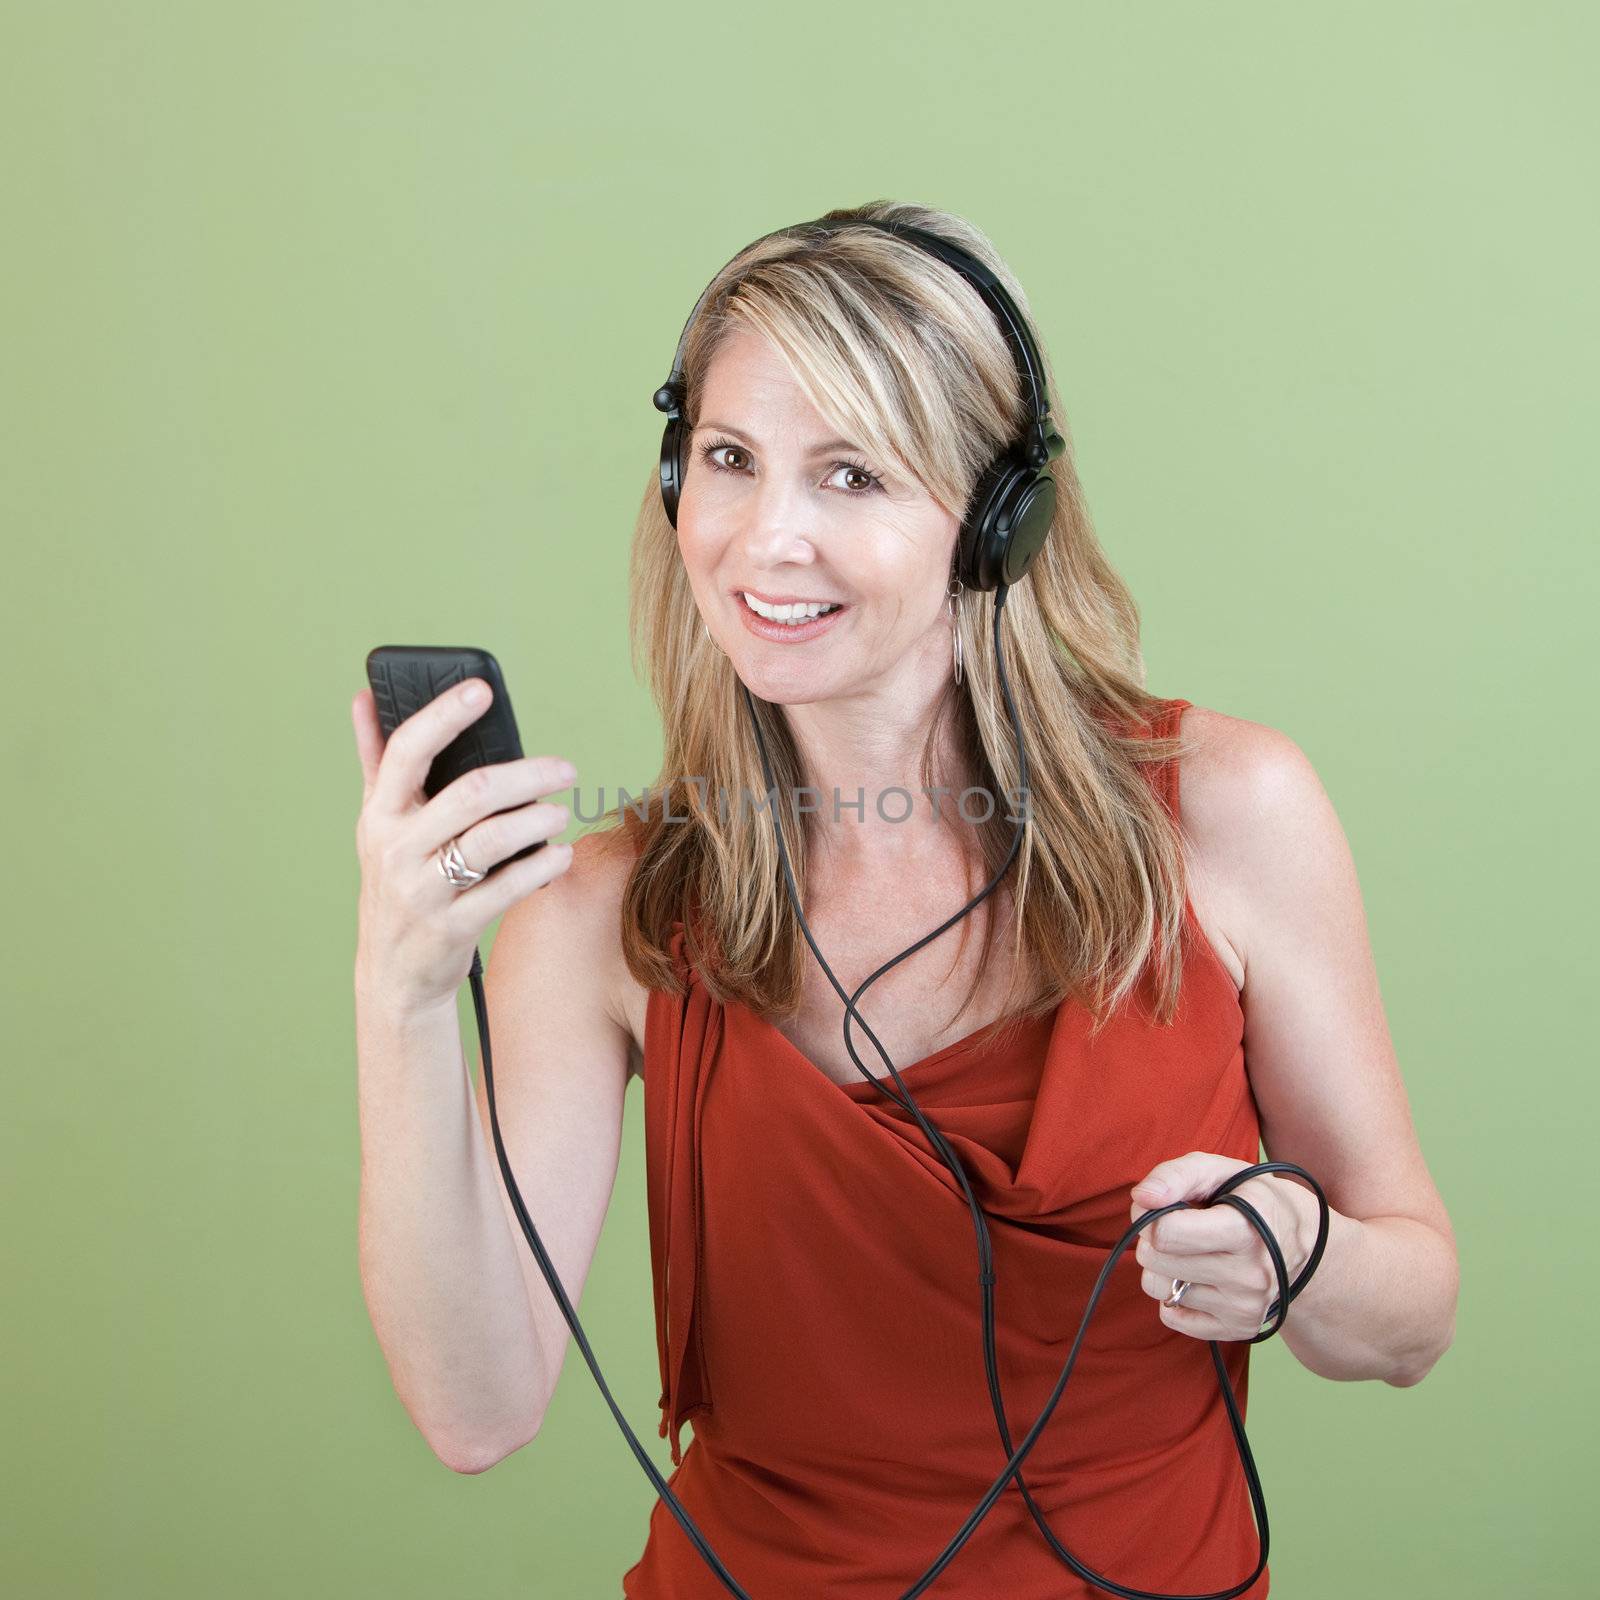 Middle-aged woman listens to music player over green background